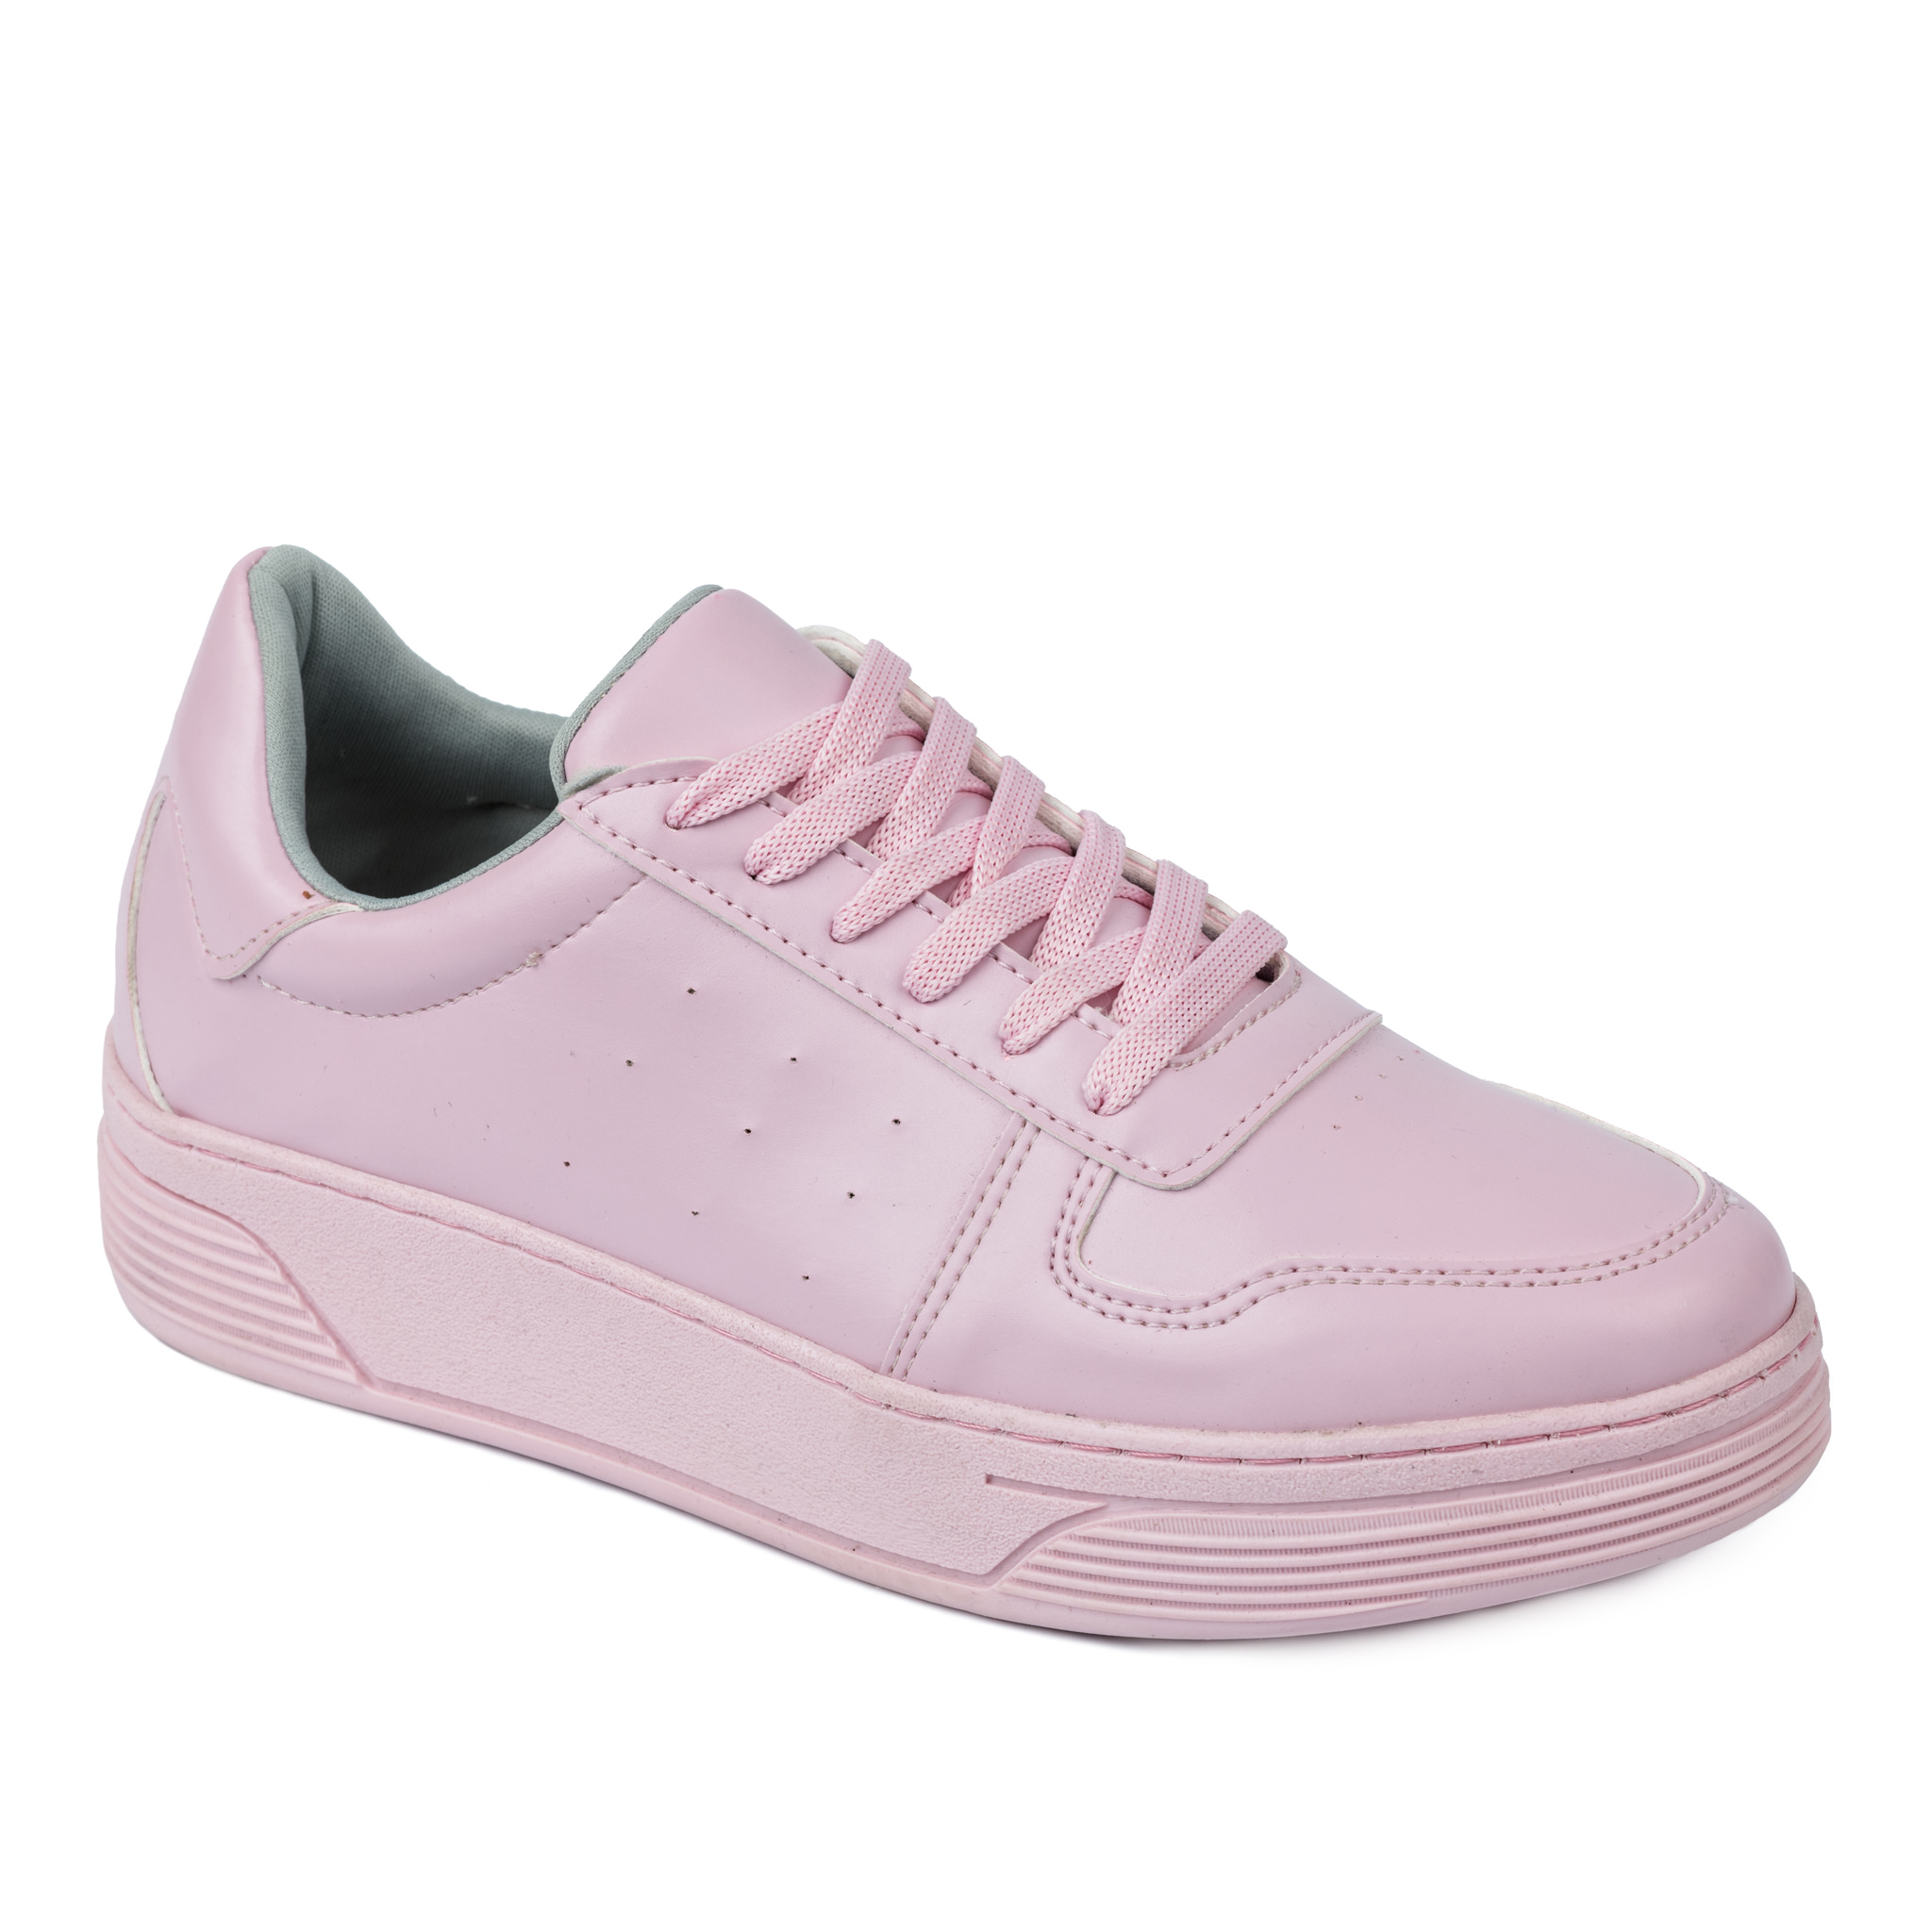 SHALLOW SNEAKERS - ROSE